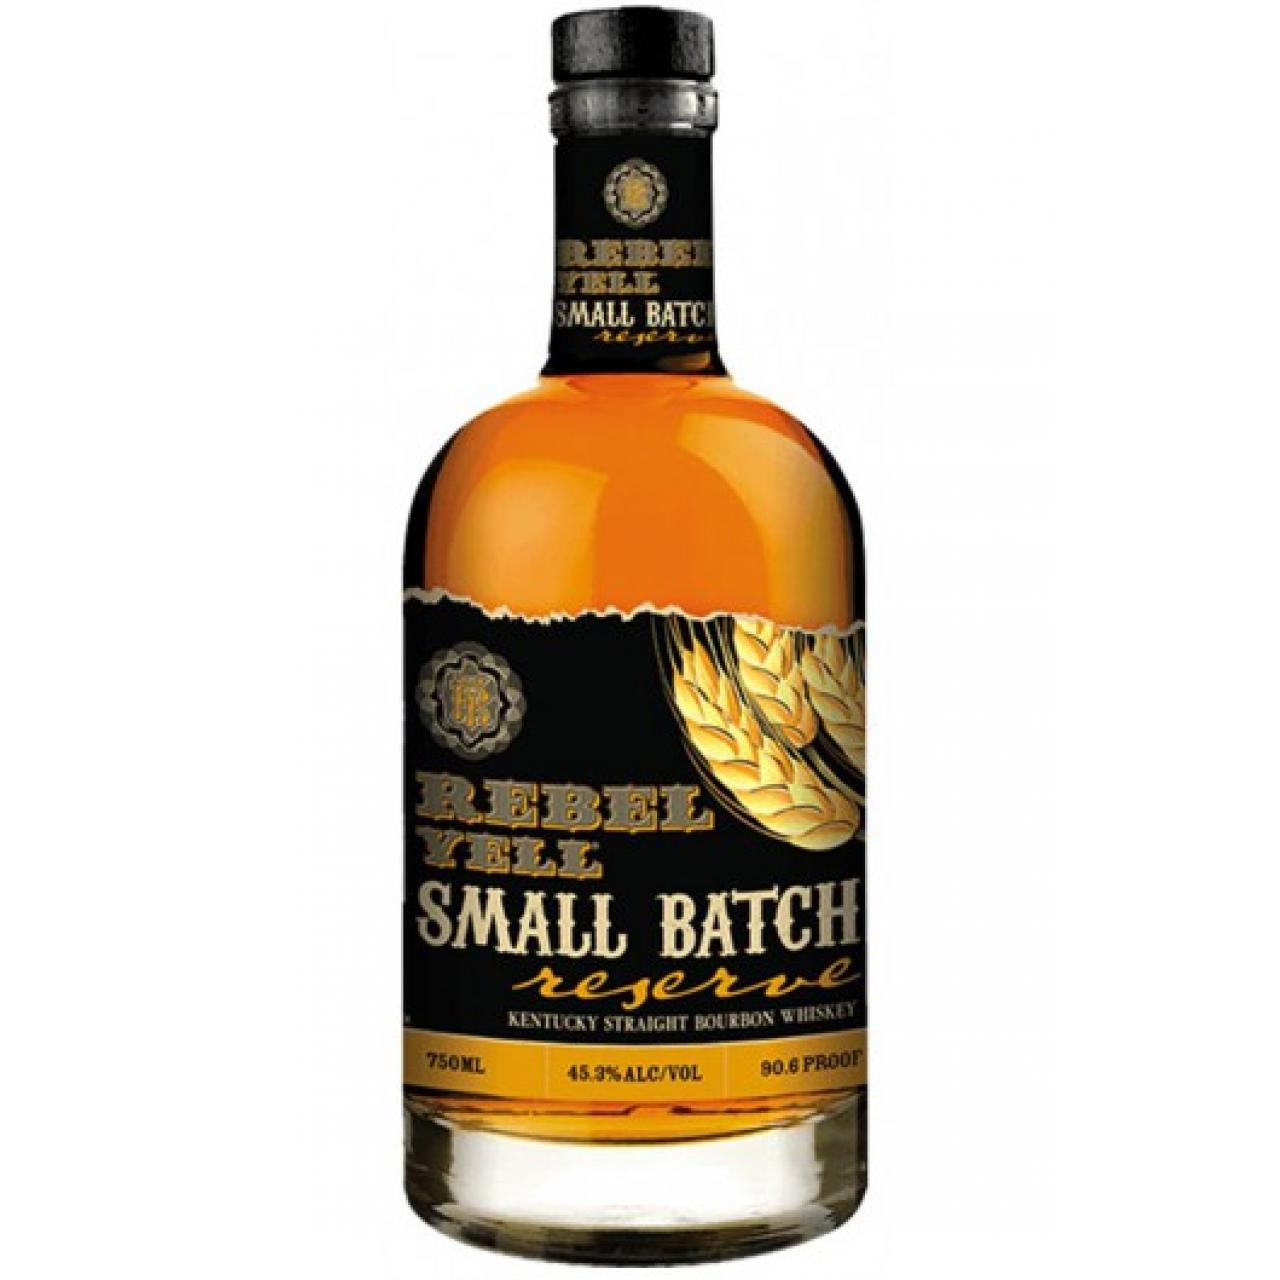 REBEL YELL SMALL BATCH RESERVE 45.3% 70CL